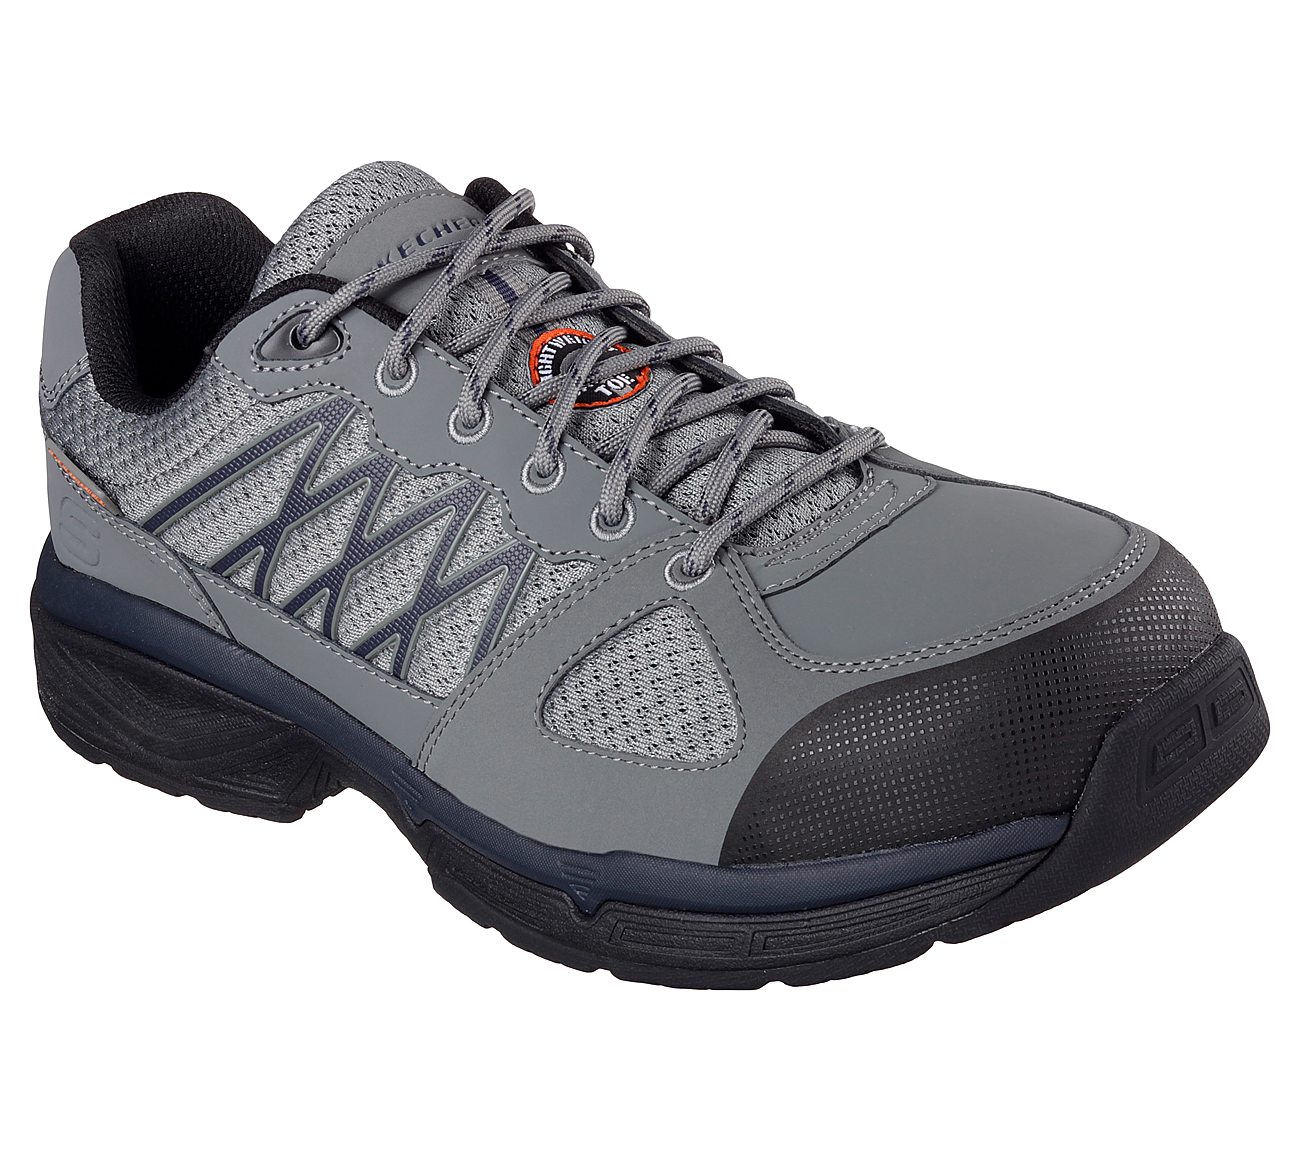 Buy SKECHERS Work Relaxed Fit: Conroe - Searcy ESD Work Shoes